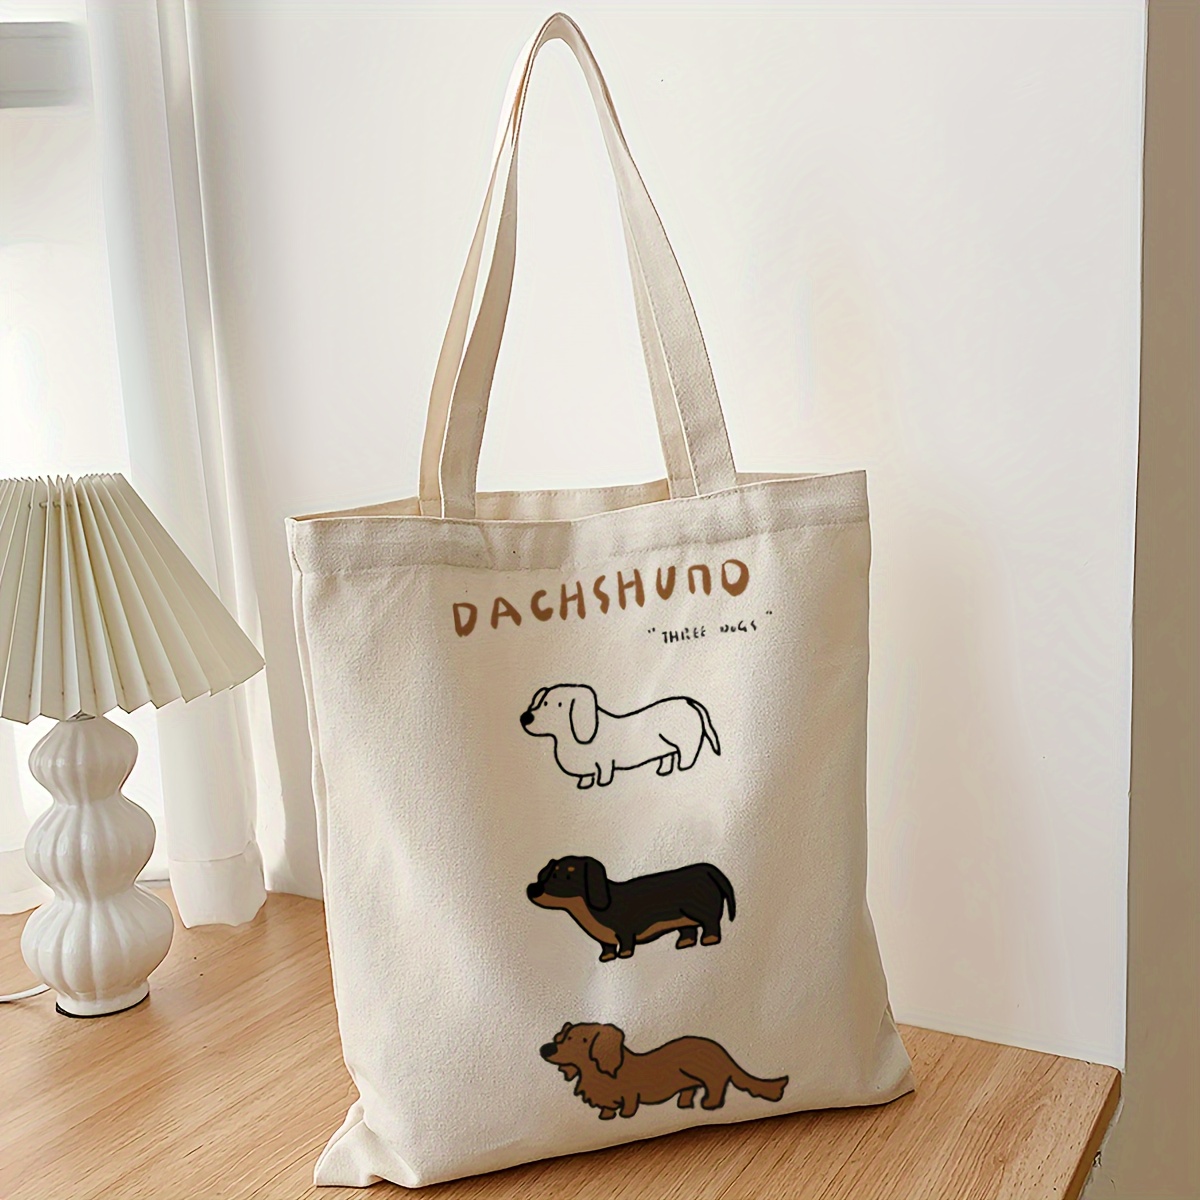 

Dachshund 3 Cute Silly Sausage Dog Canvas Tote Bag, Casual Large Capacity Shoulder Bag, Buy Food Packaging, Daily Shopping Bag, Multi-purpose Storage Bag, Good Gifts